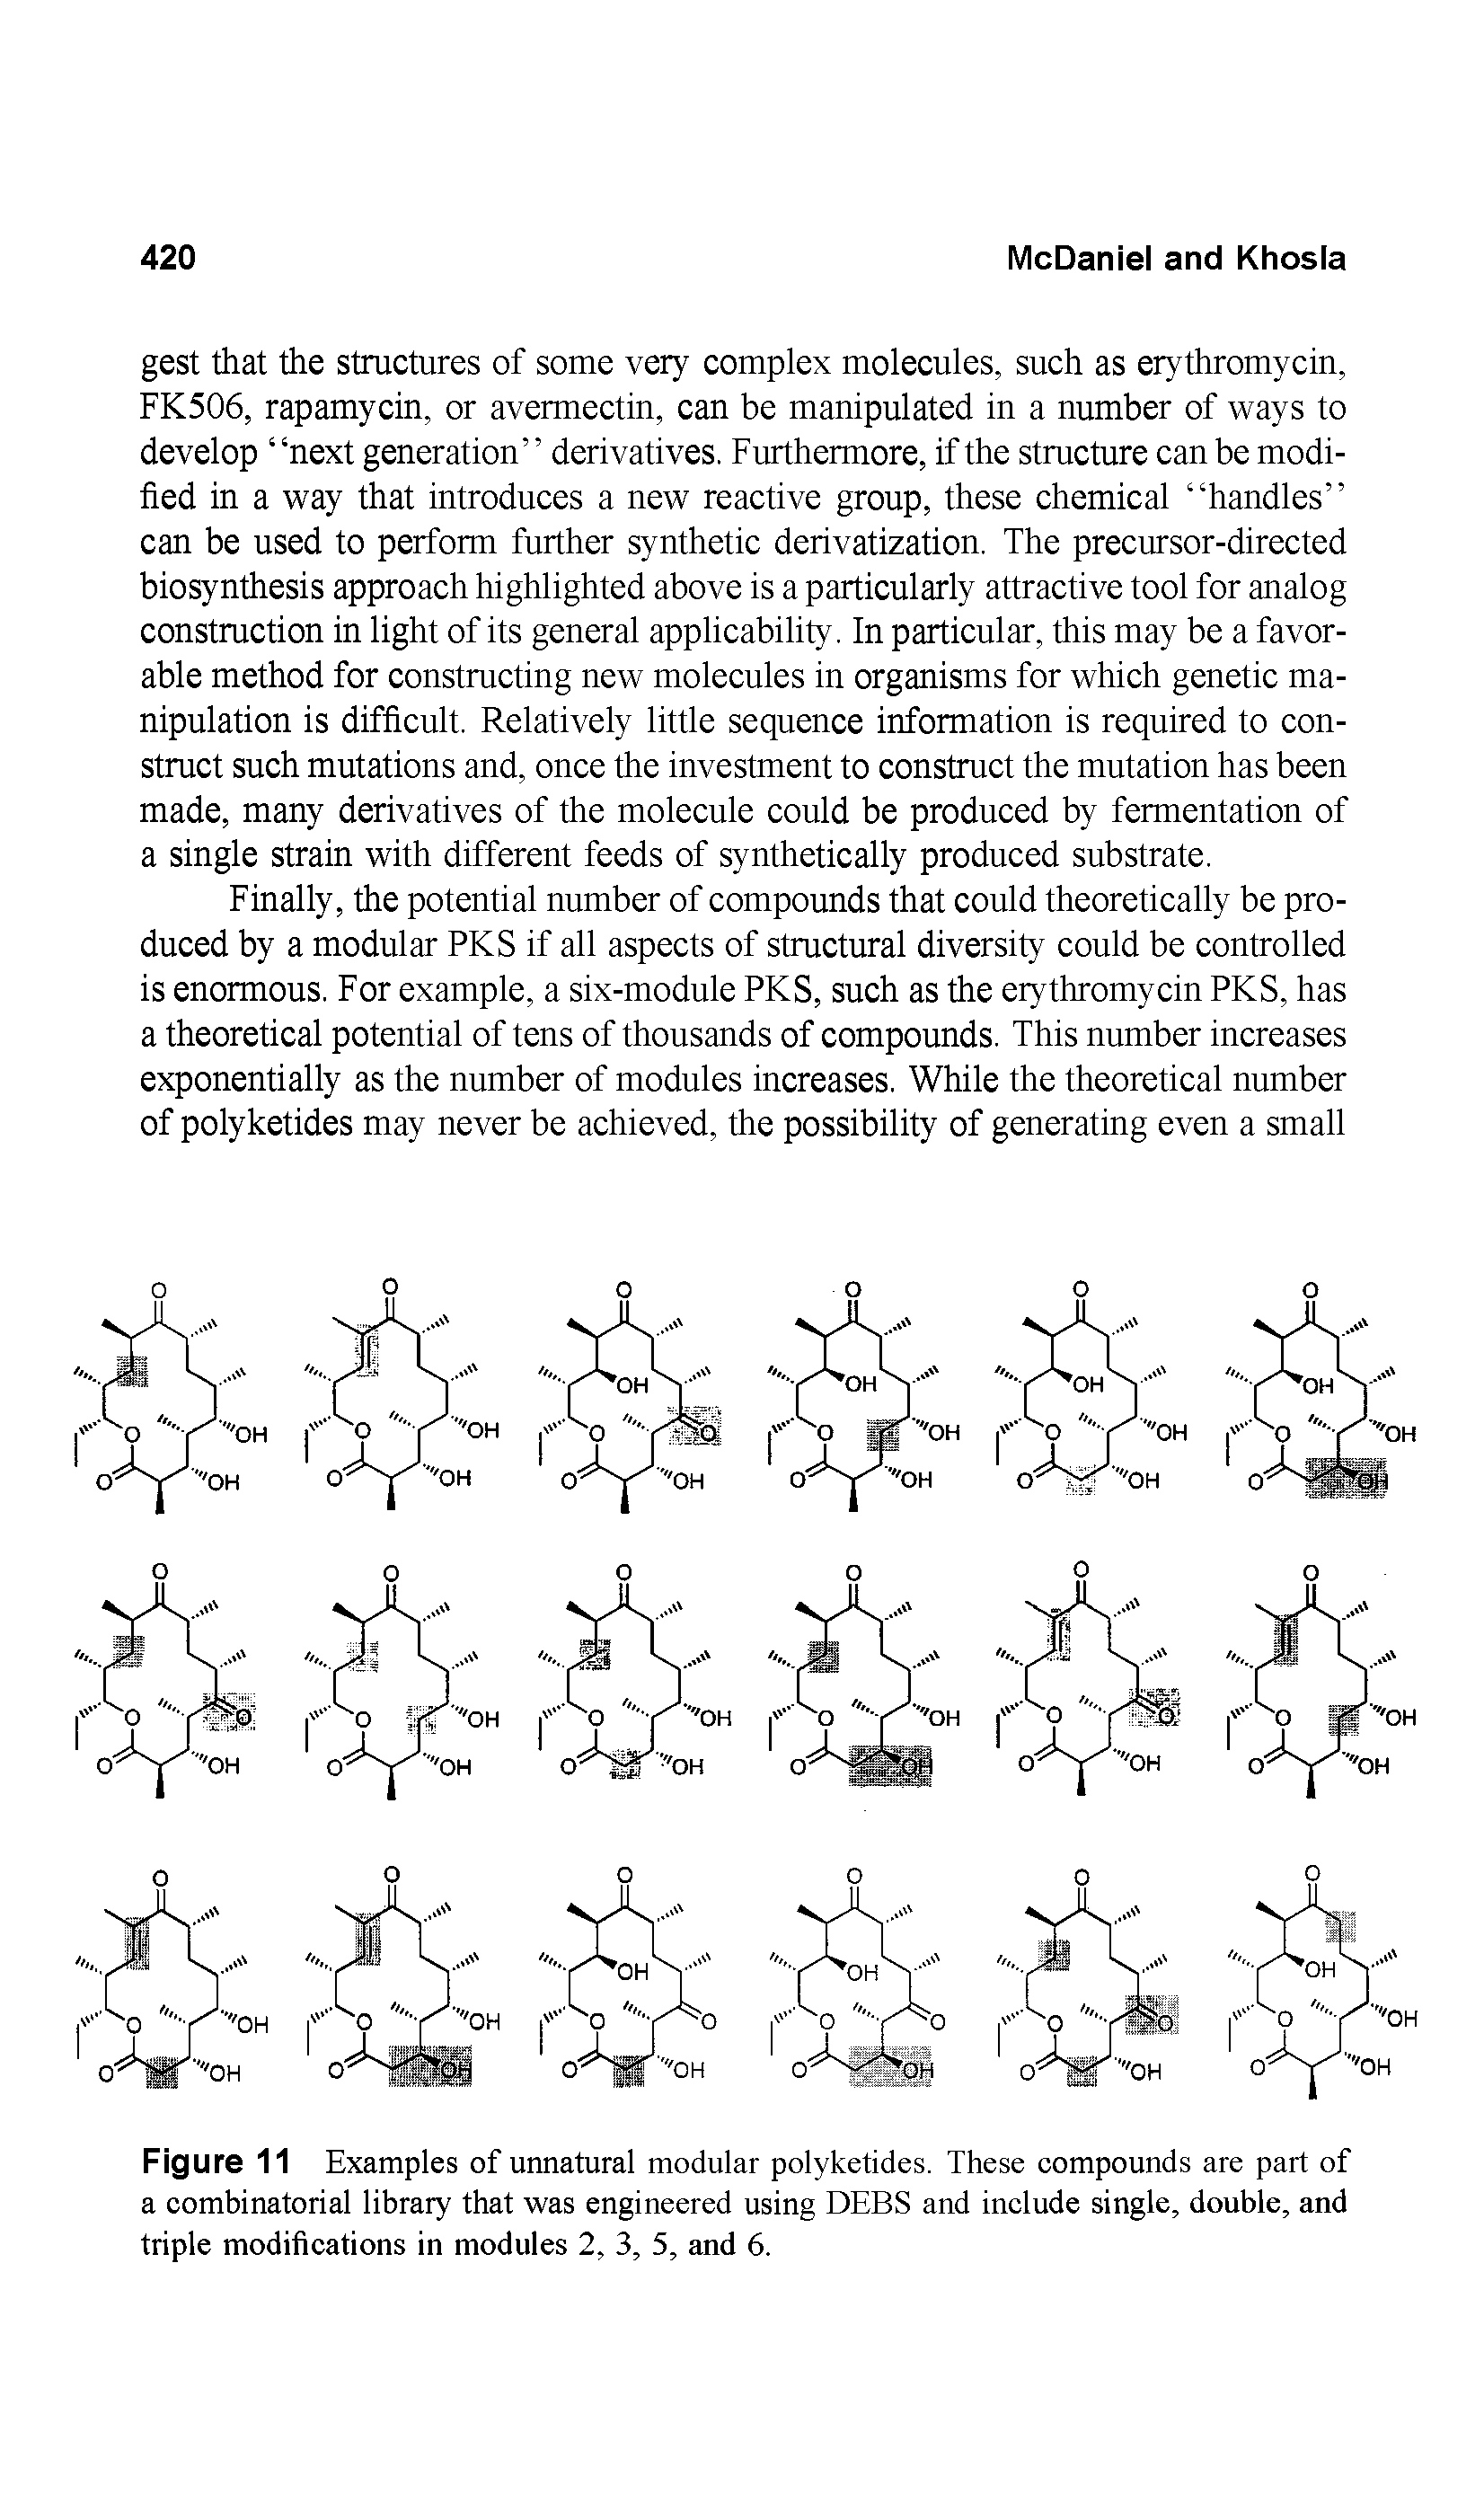 Figure 11 Examples of unnatural modular polyketides. These compounds are part of a combinatorial library that was engineered using DEBS and include single, double, and triple modifications in modules 2, 3, 5, and 6.